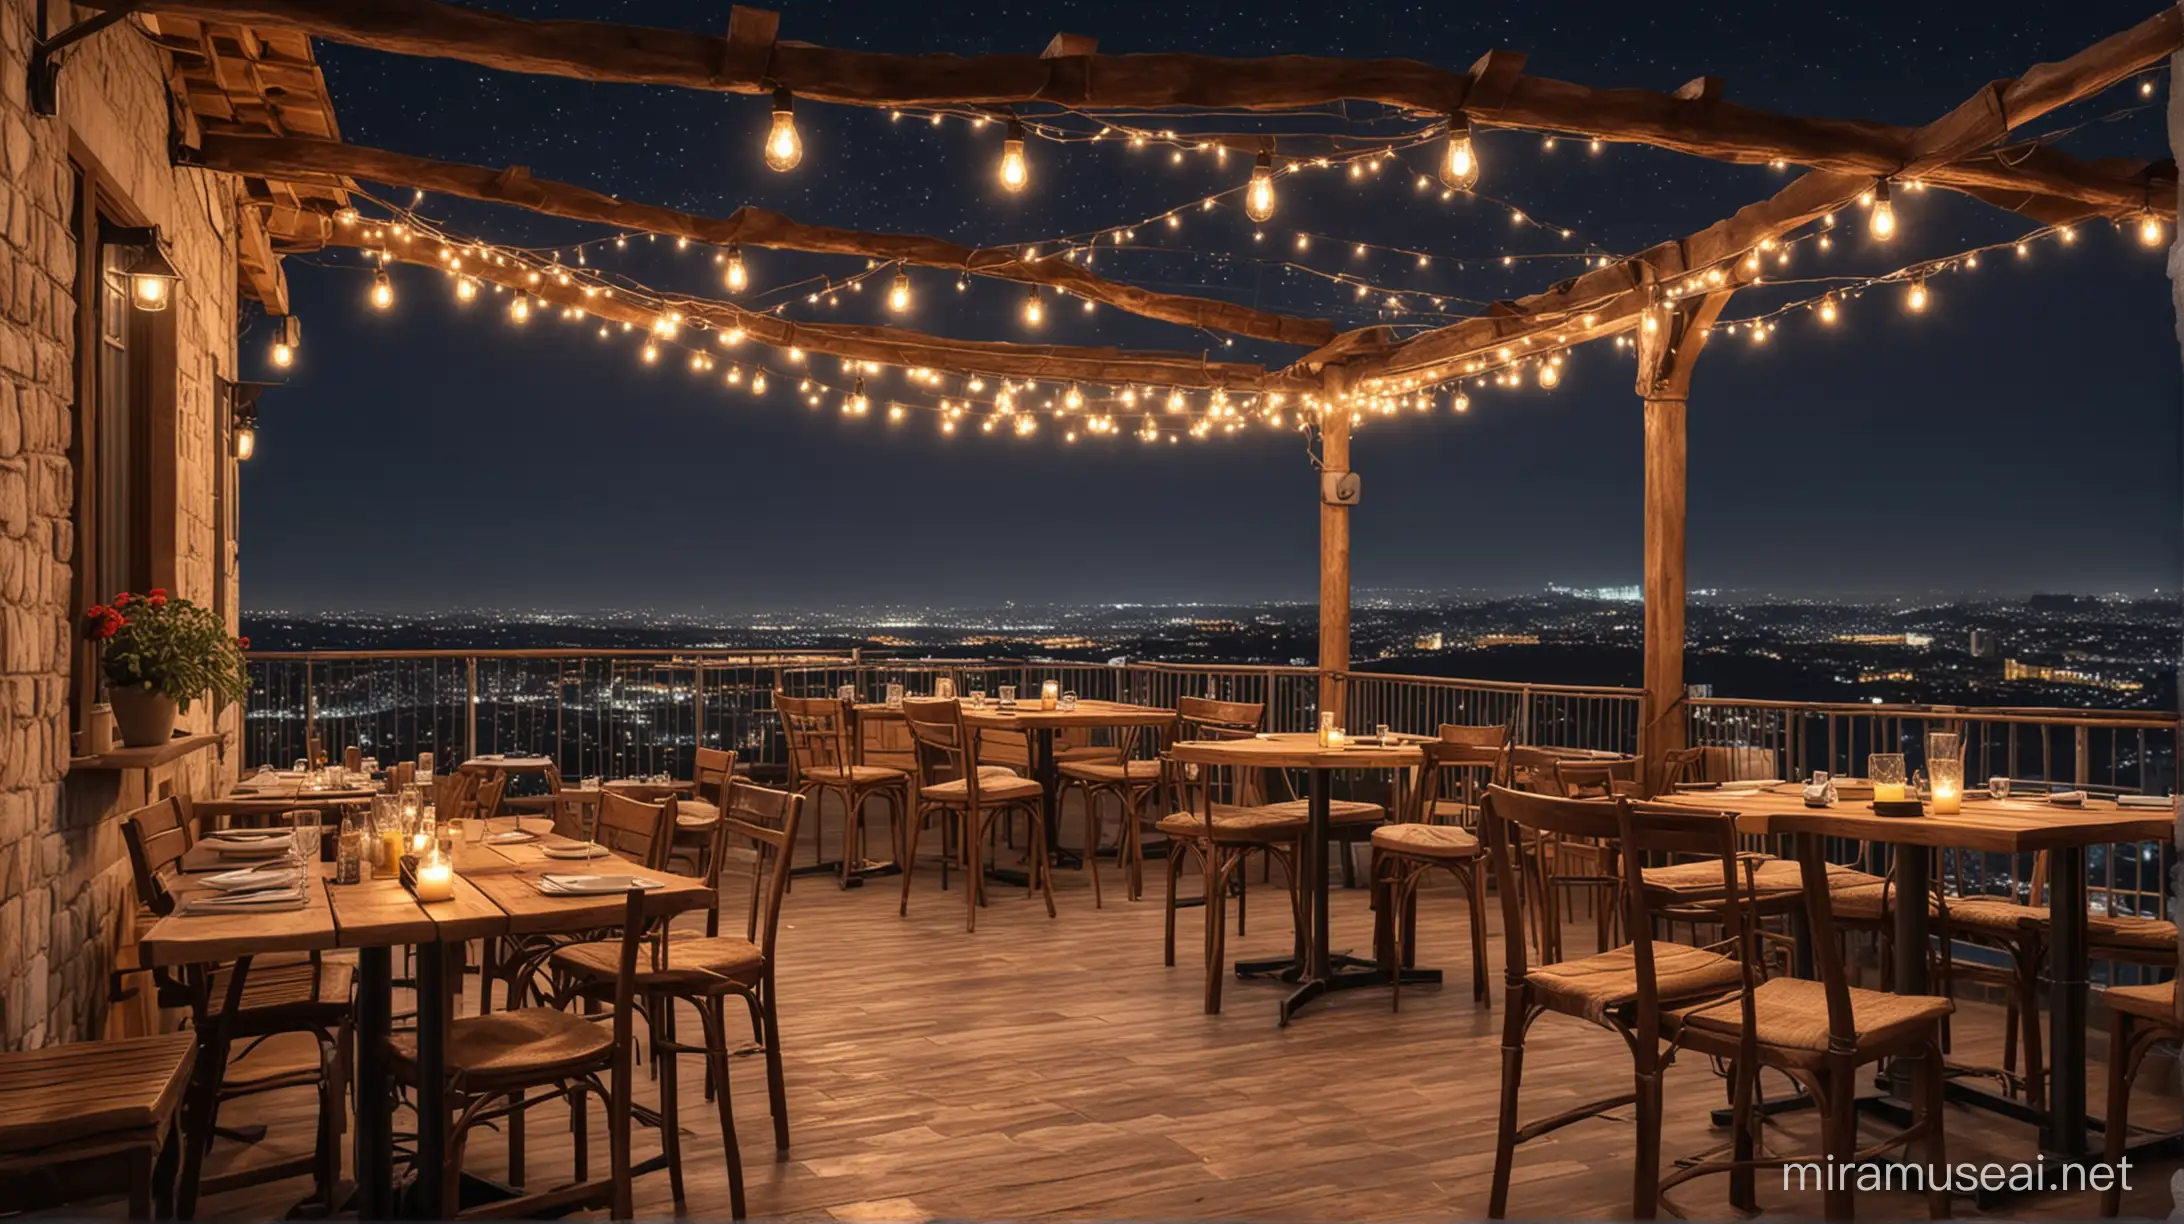 Rustic Rooftop OpenAir Cafe with Breathtaking Night View